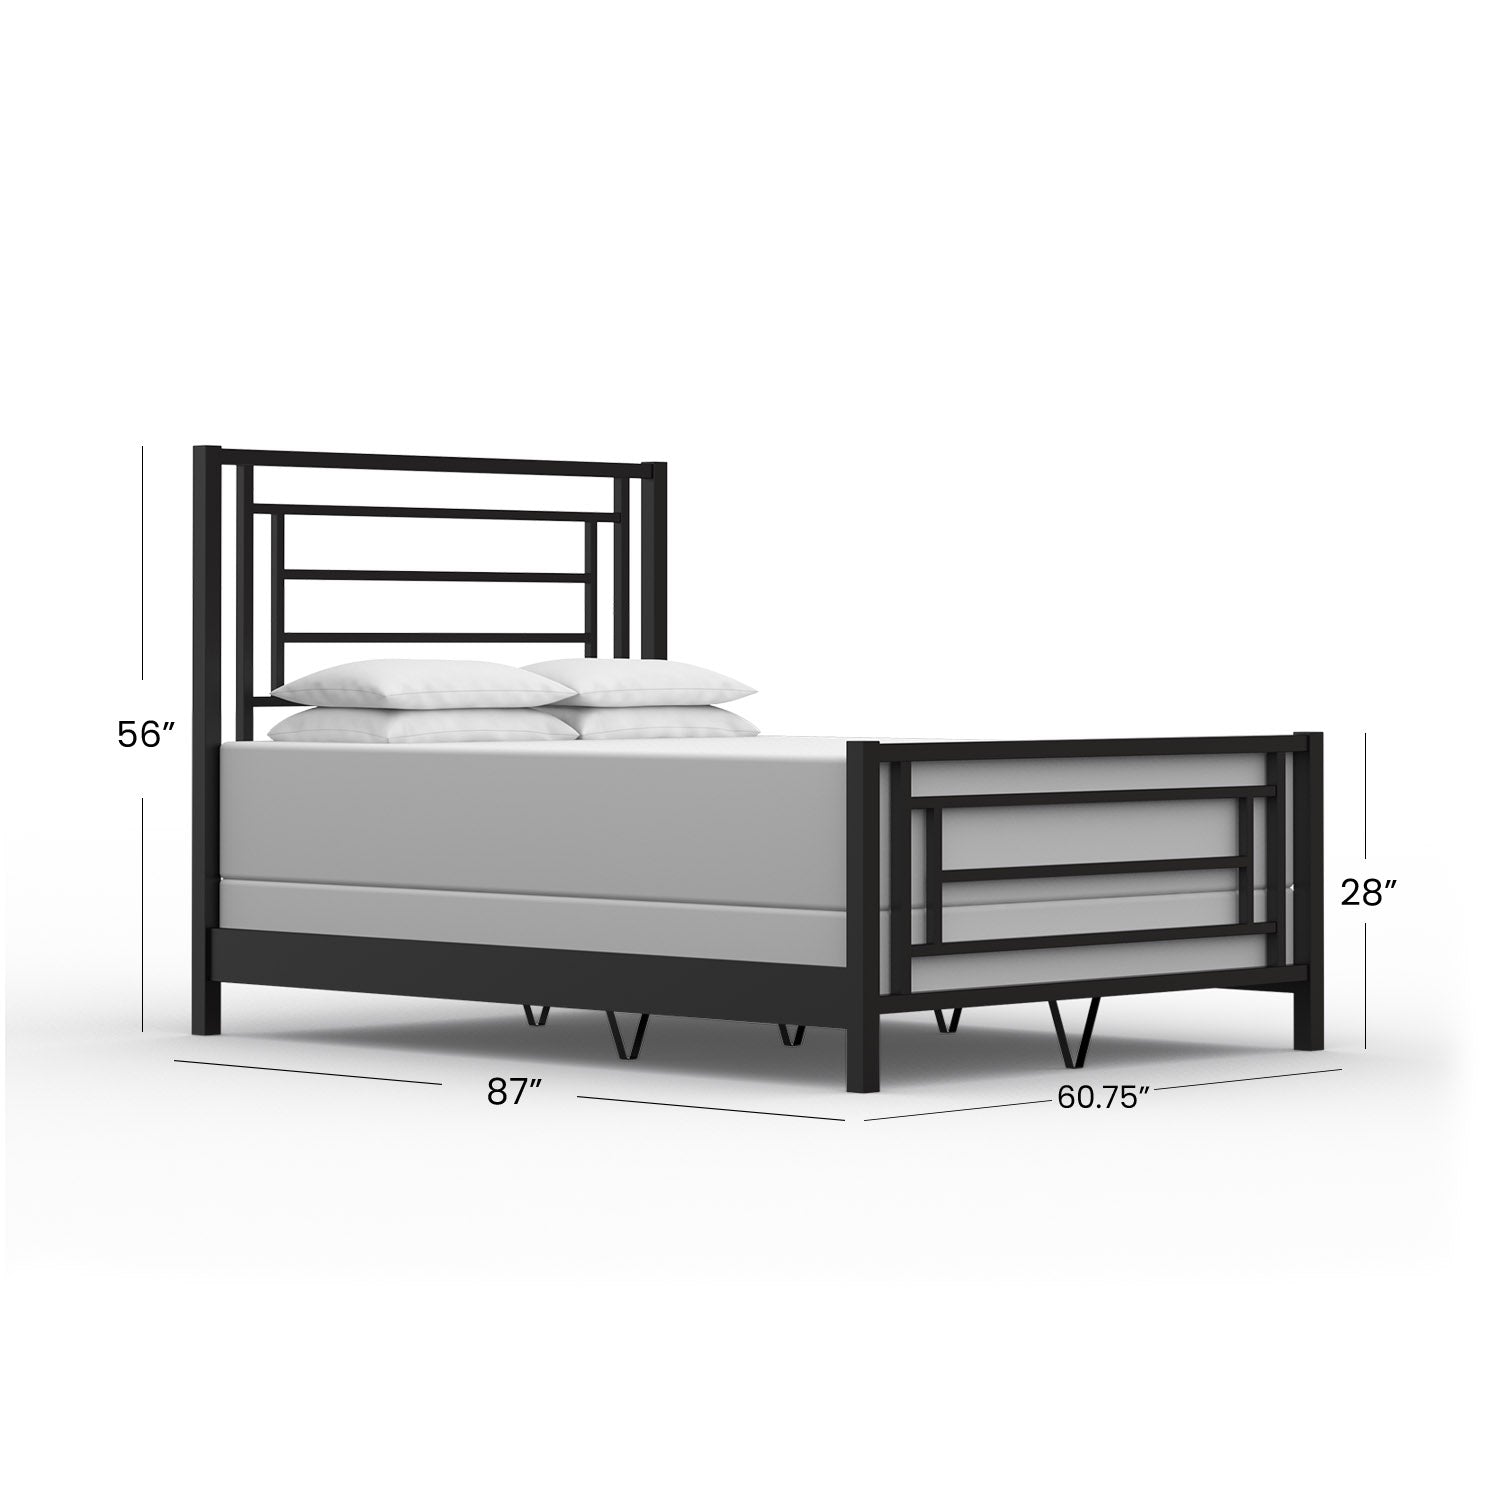 Sizing and Dimensions of Wesley Allen Sunset Iron Bed